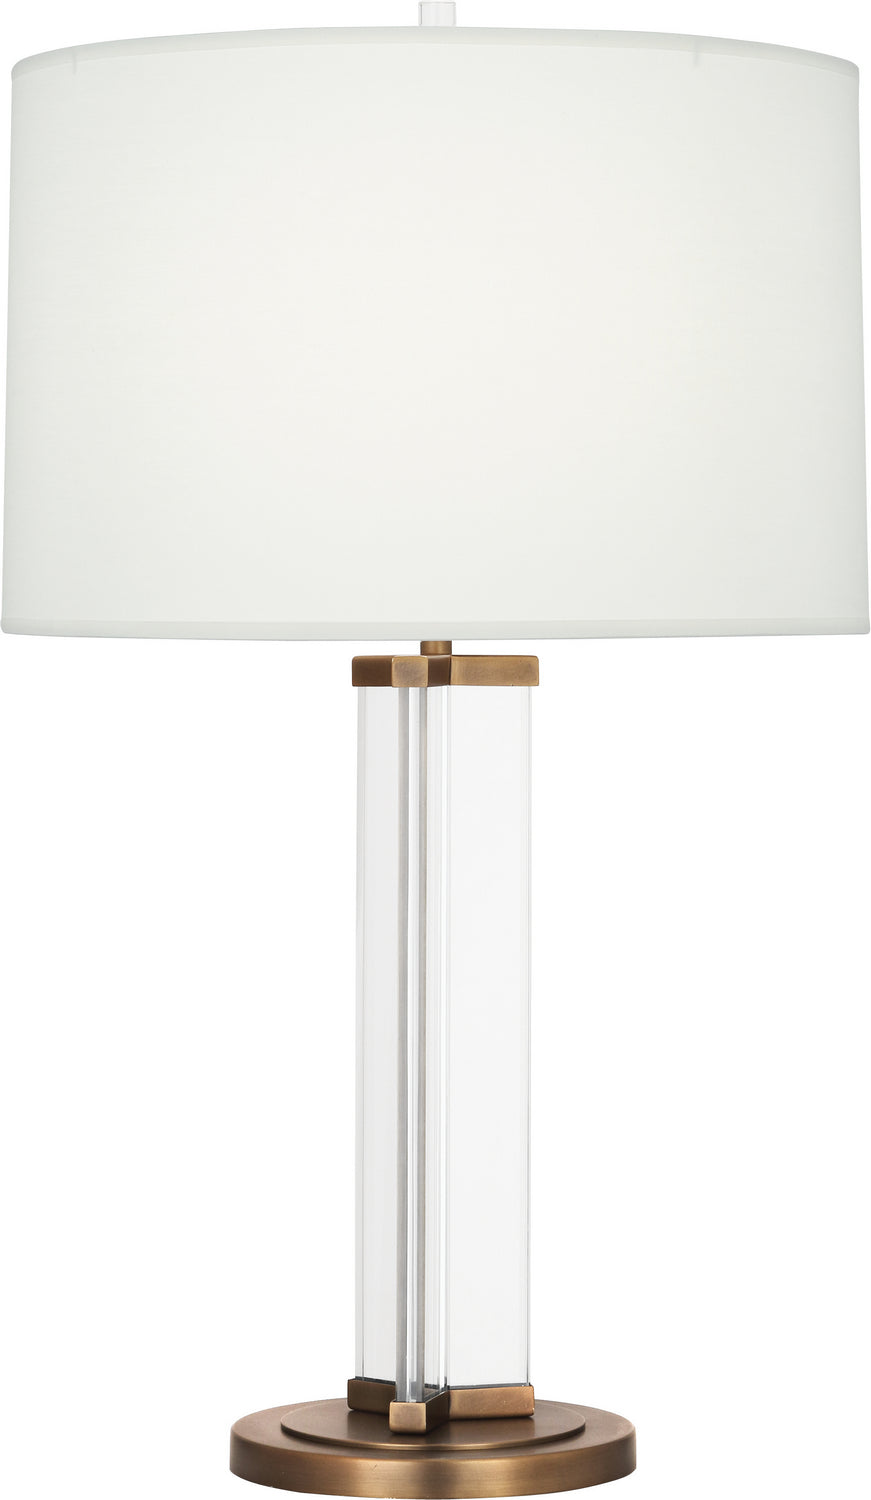 Robert Abbey - One Light Table Lamp - Fineas - Clear Glass and Aged Brass- Union Lighting Luminaires Decor